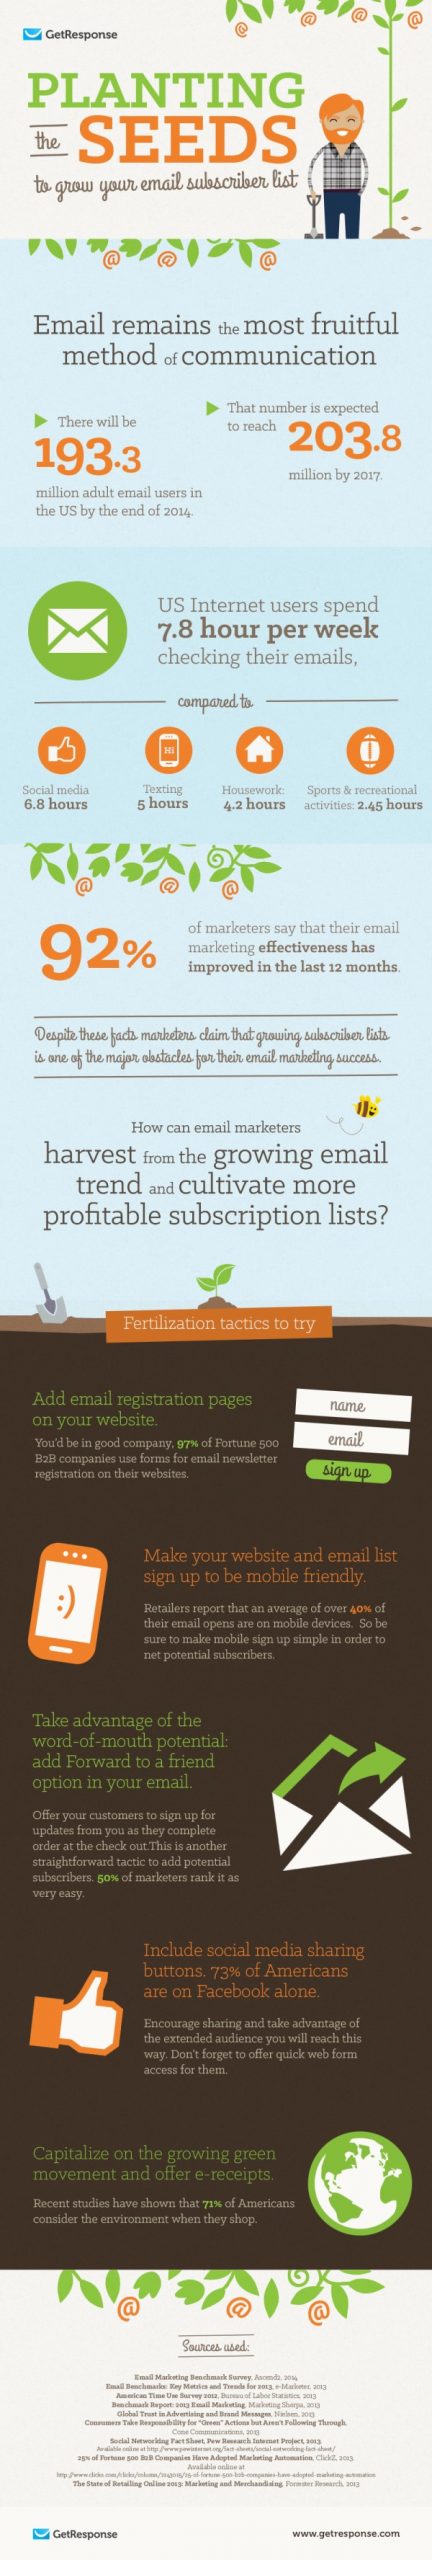 Infographic - Planting The Seeds To Grow Your Email Subscriber List